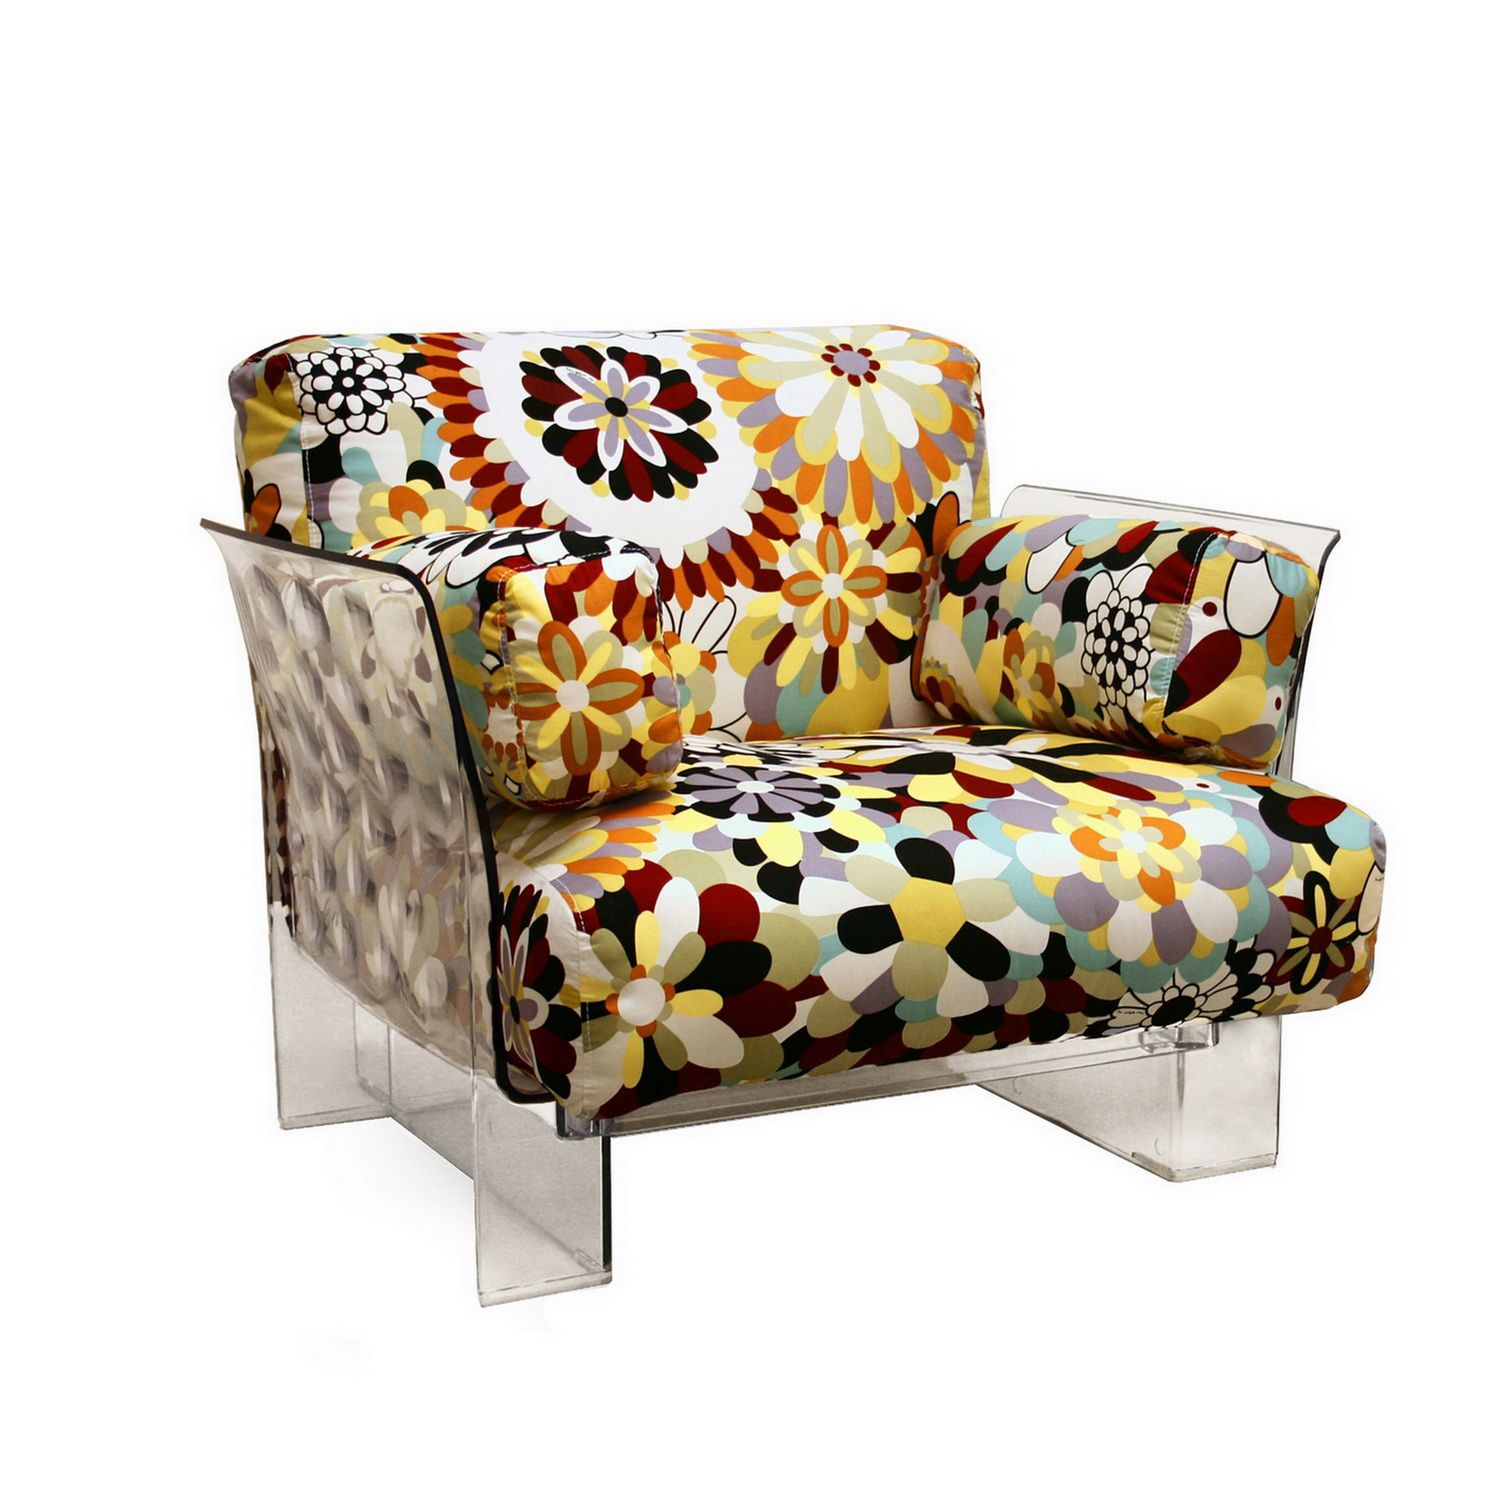 UPC 847321000100 product image for Baxton Pop Chair with Floral Pattern Cushions and Clear Acrylic Base | upcitemdb.com